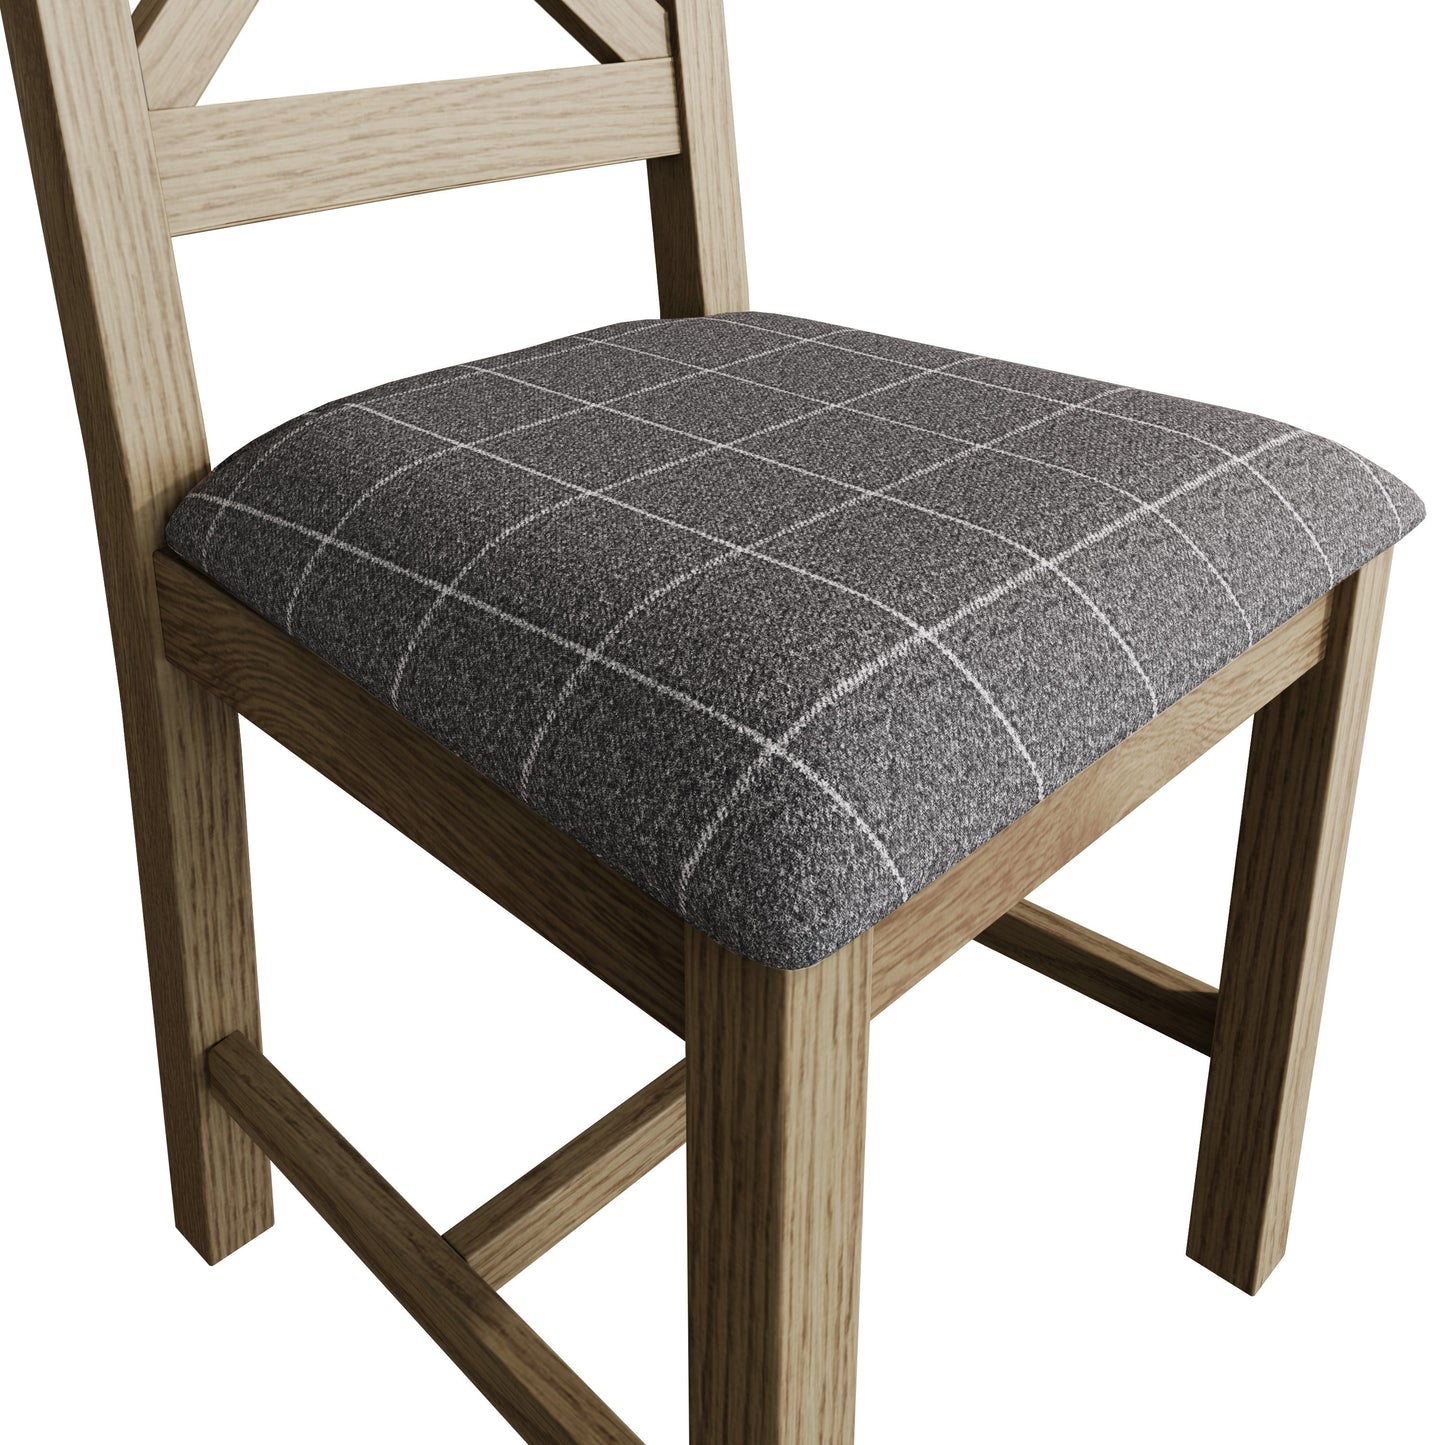 Horner Cross Back Fabric Seat Dining Chair